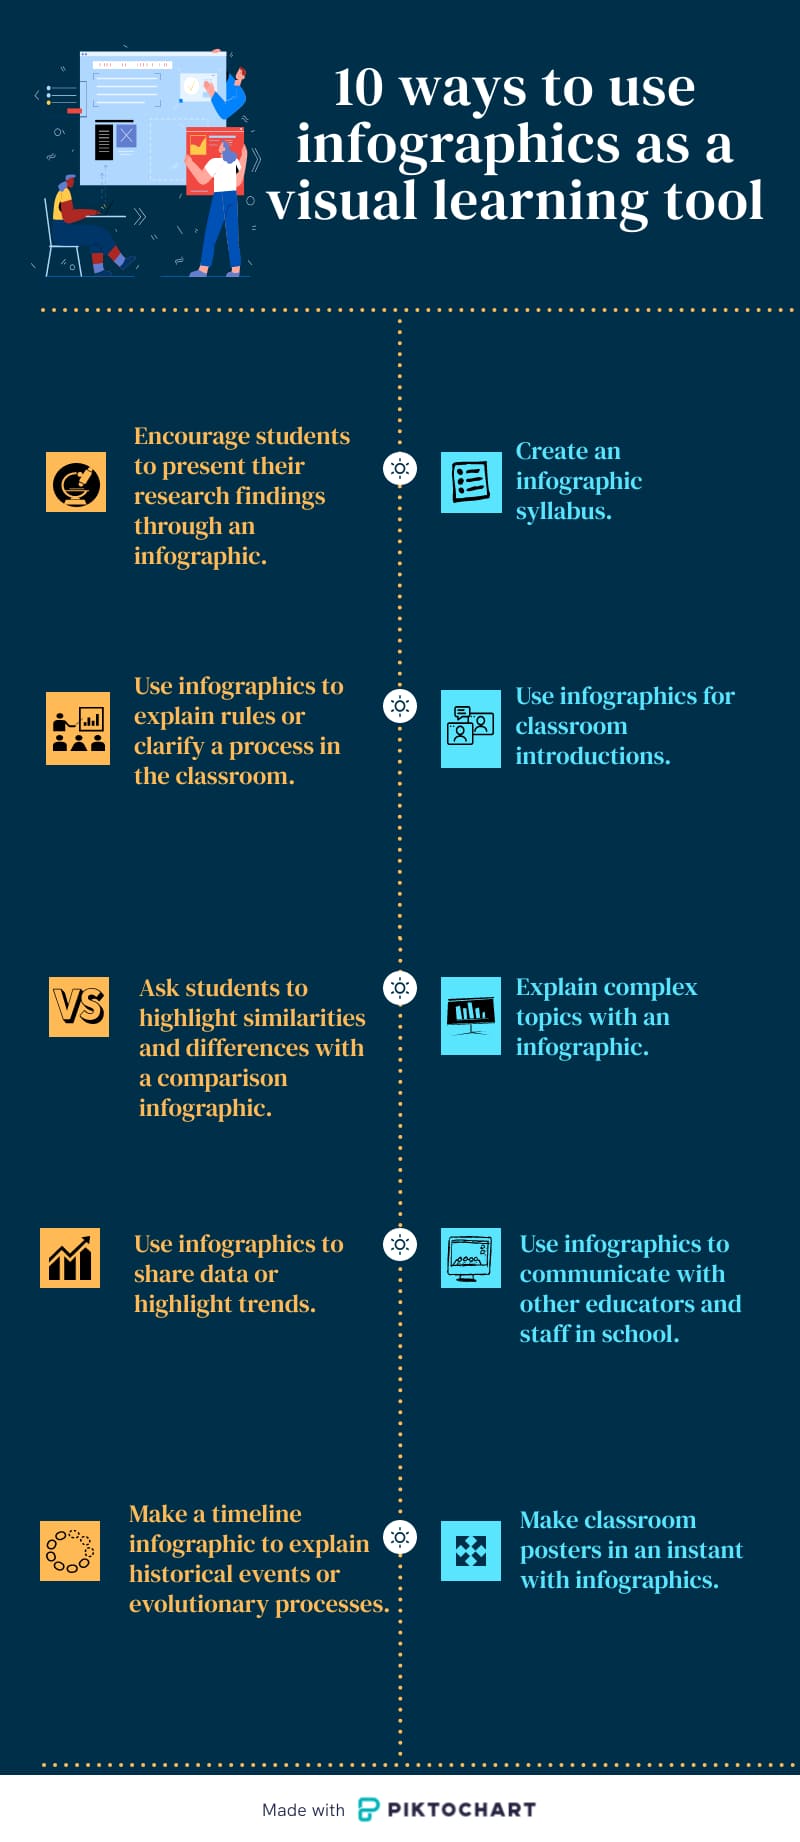 an infographic listing 10 different ways to use infographics in the classroom